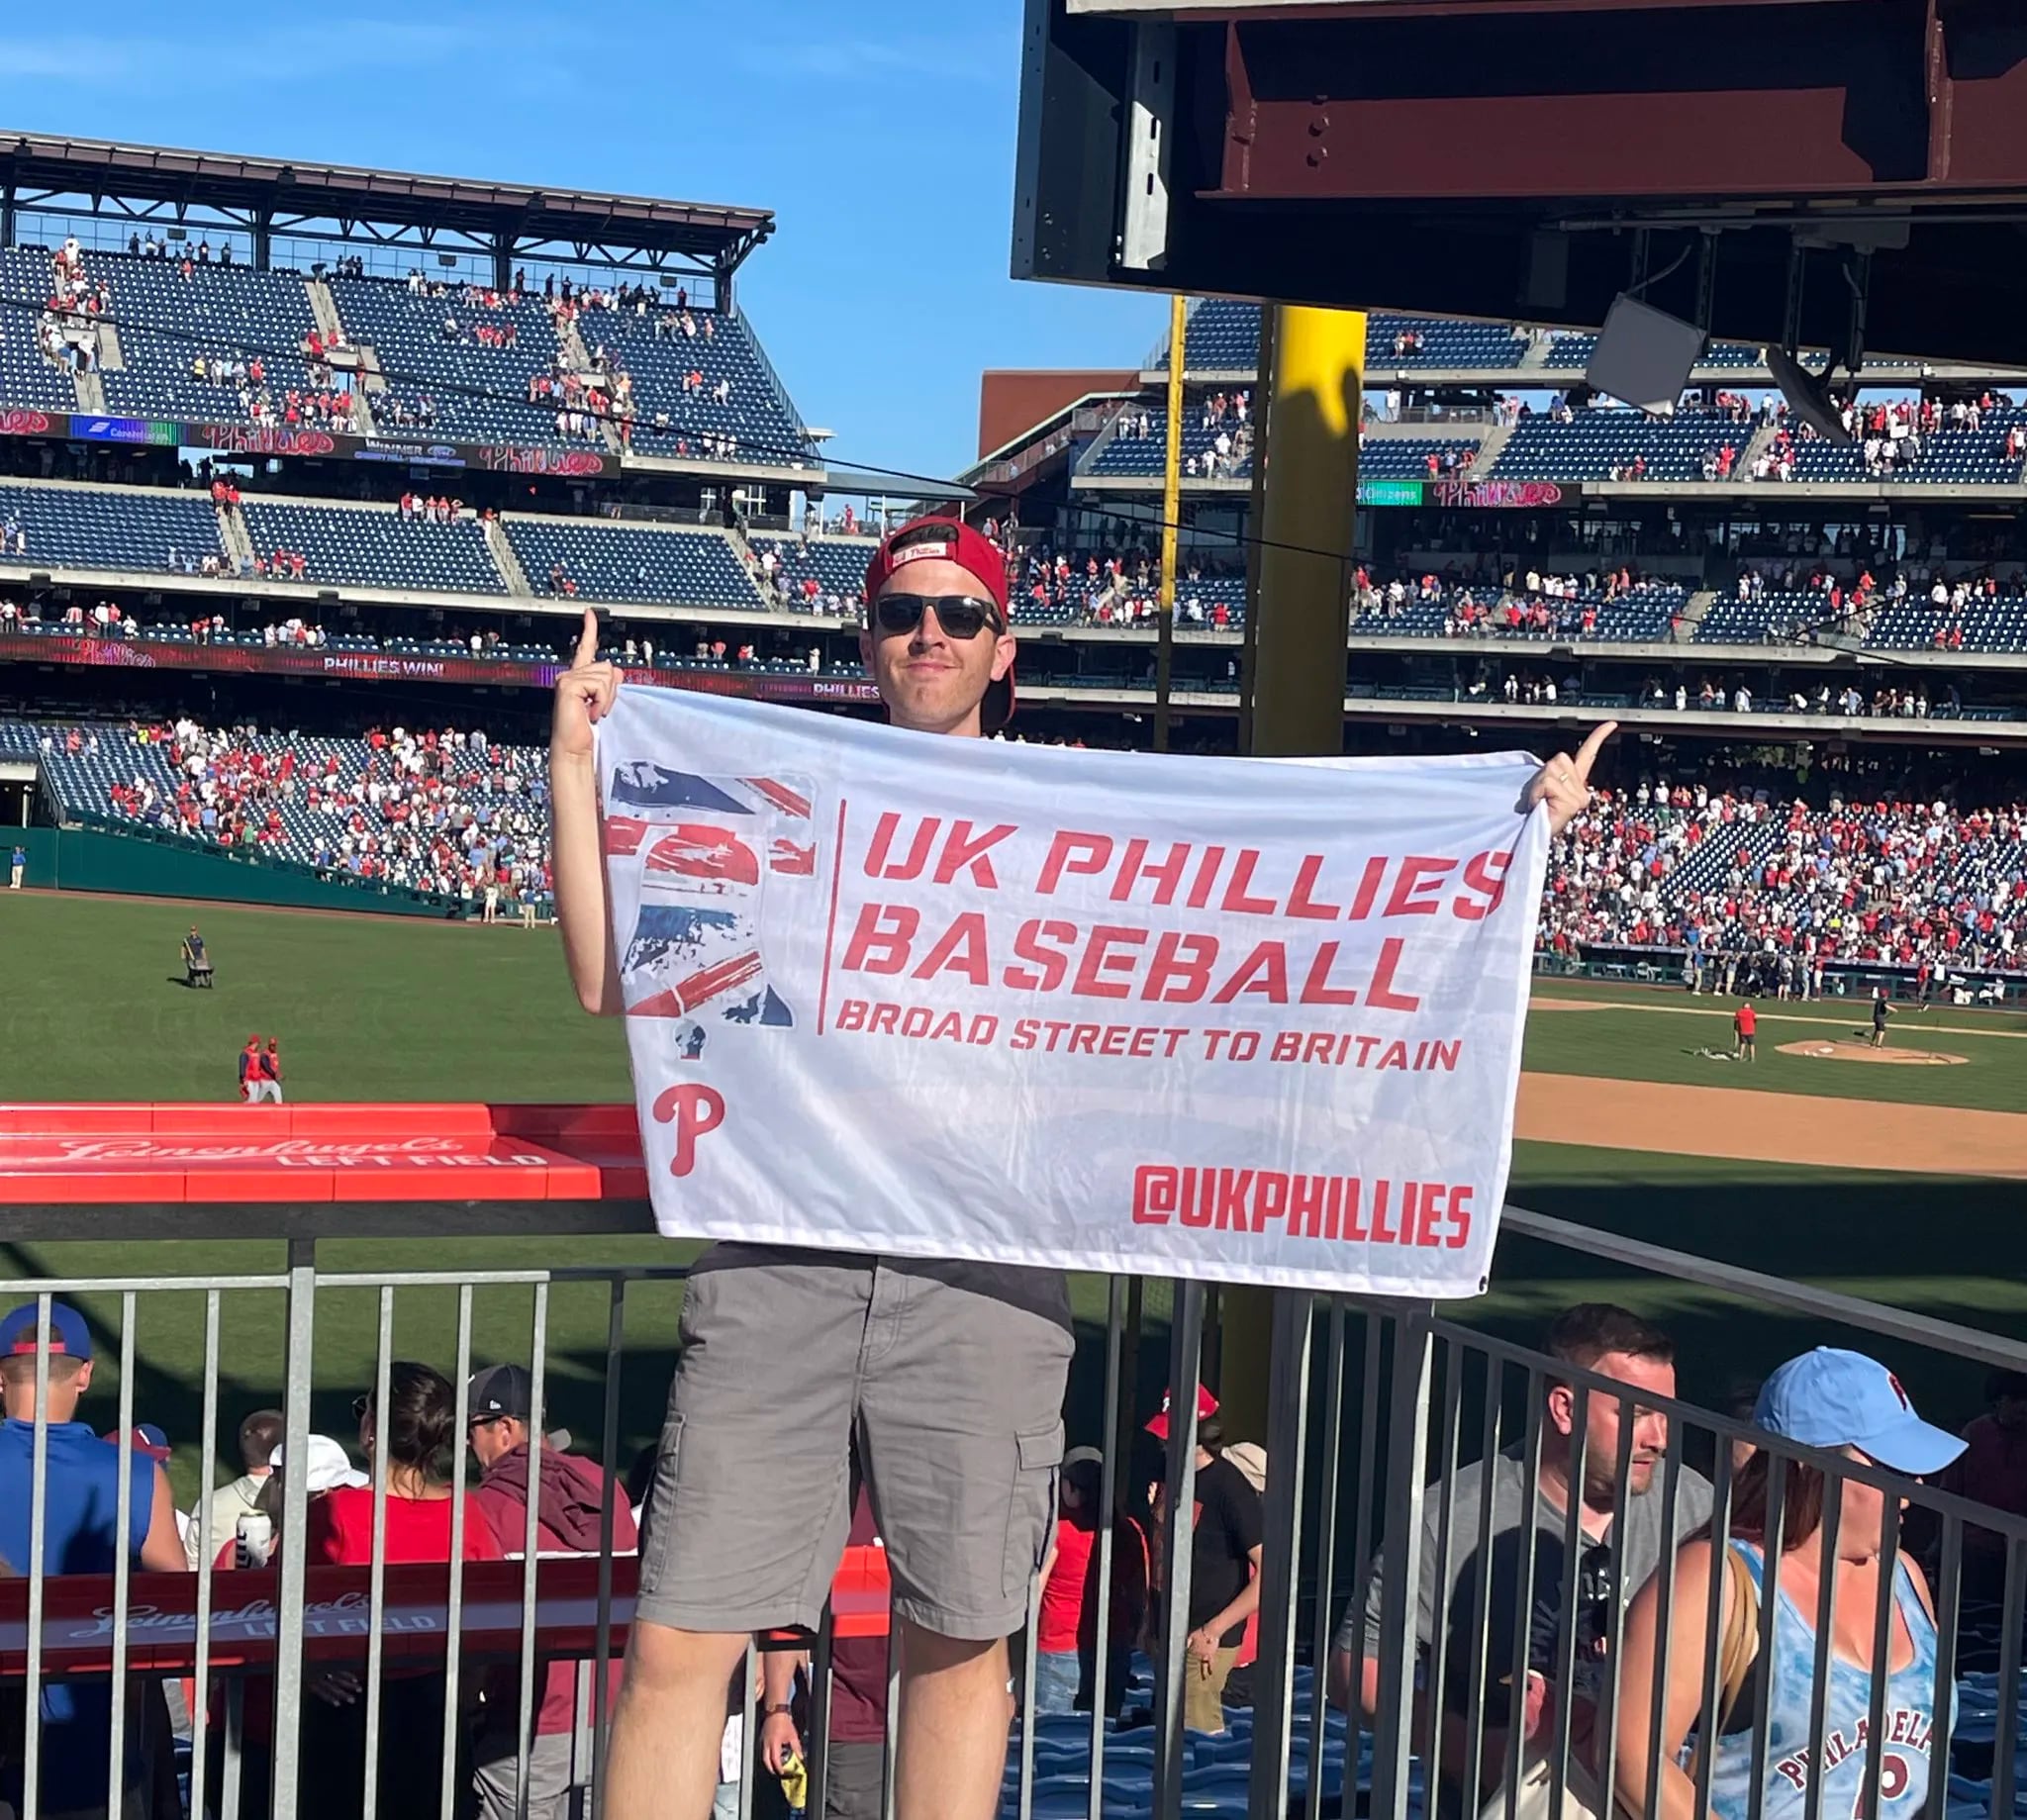 Phillies legend Chase Utley places home plate at London Stadium